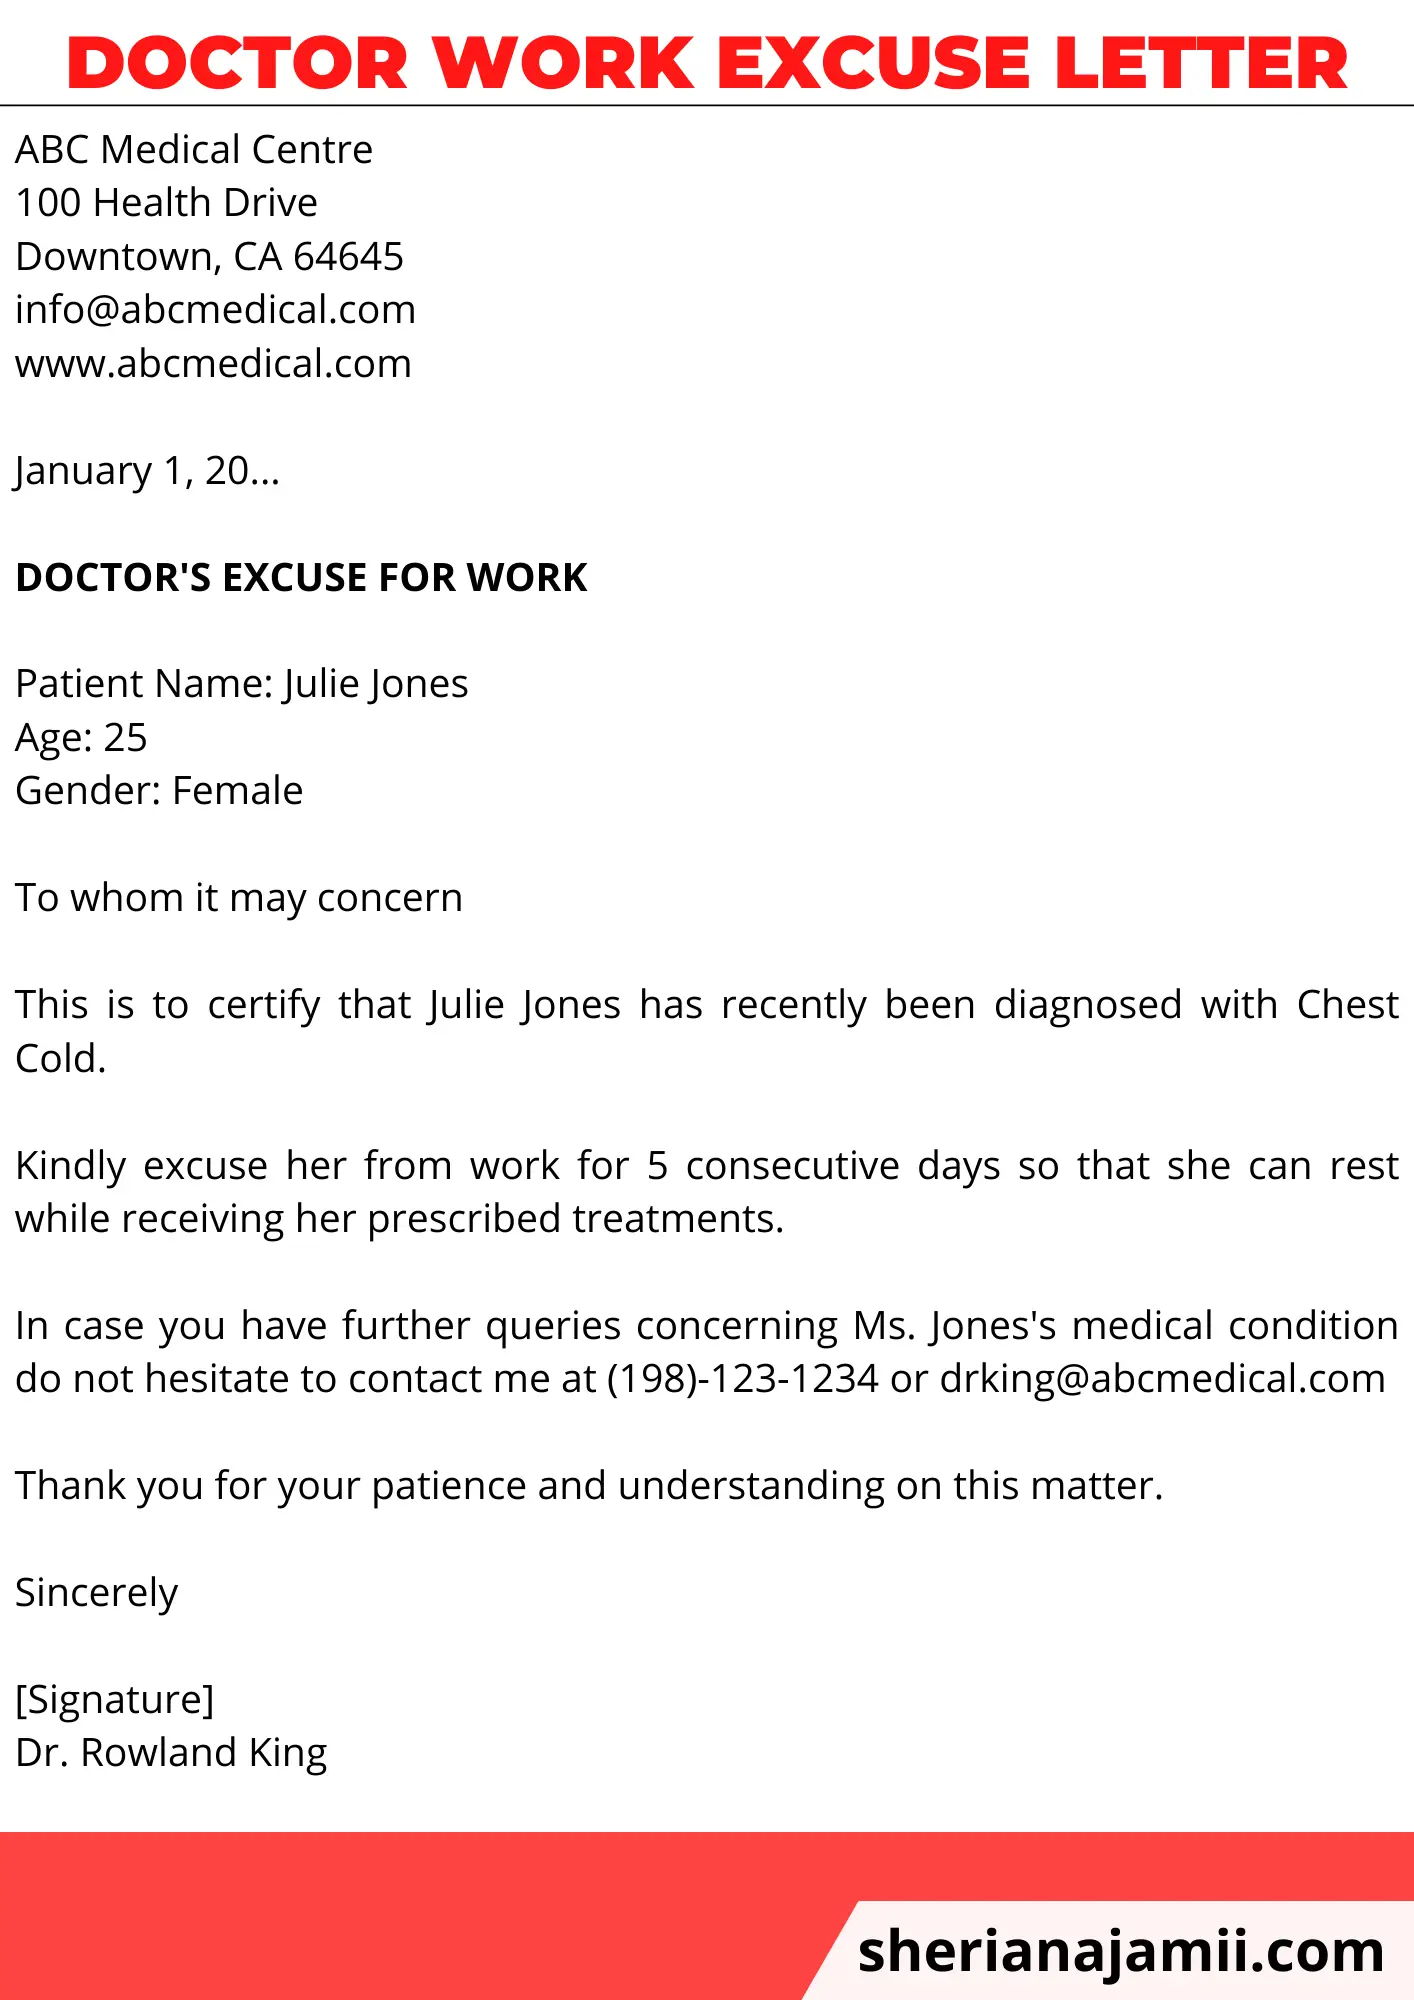 Doctor work excuse letter, work excuse letter from doctor, doctor work excuse letter sample